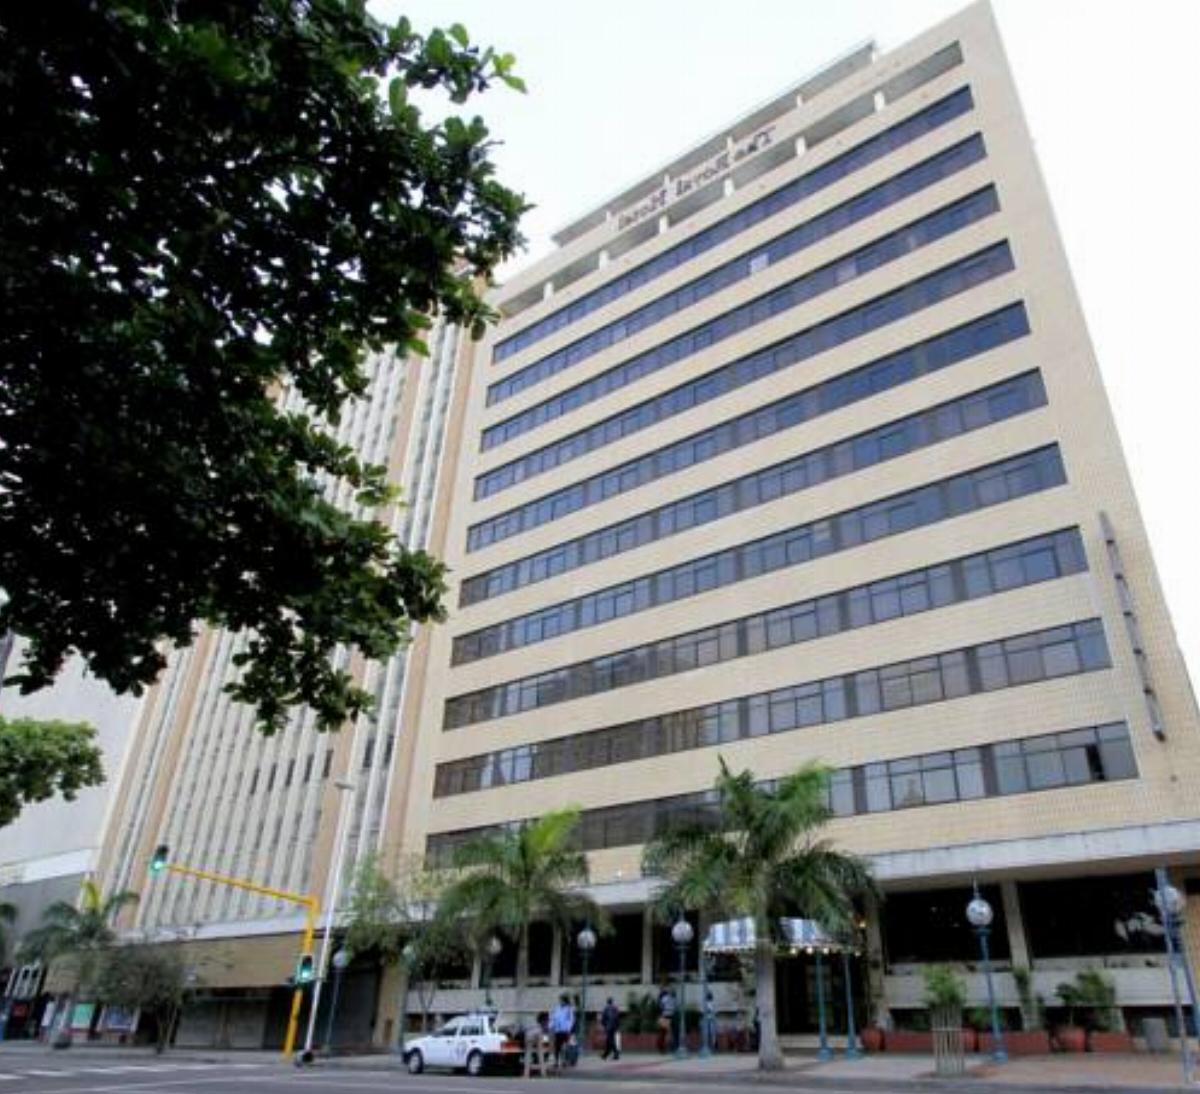 The Royal Hotel Hotel Durban South Africa